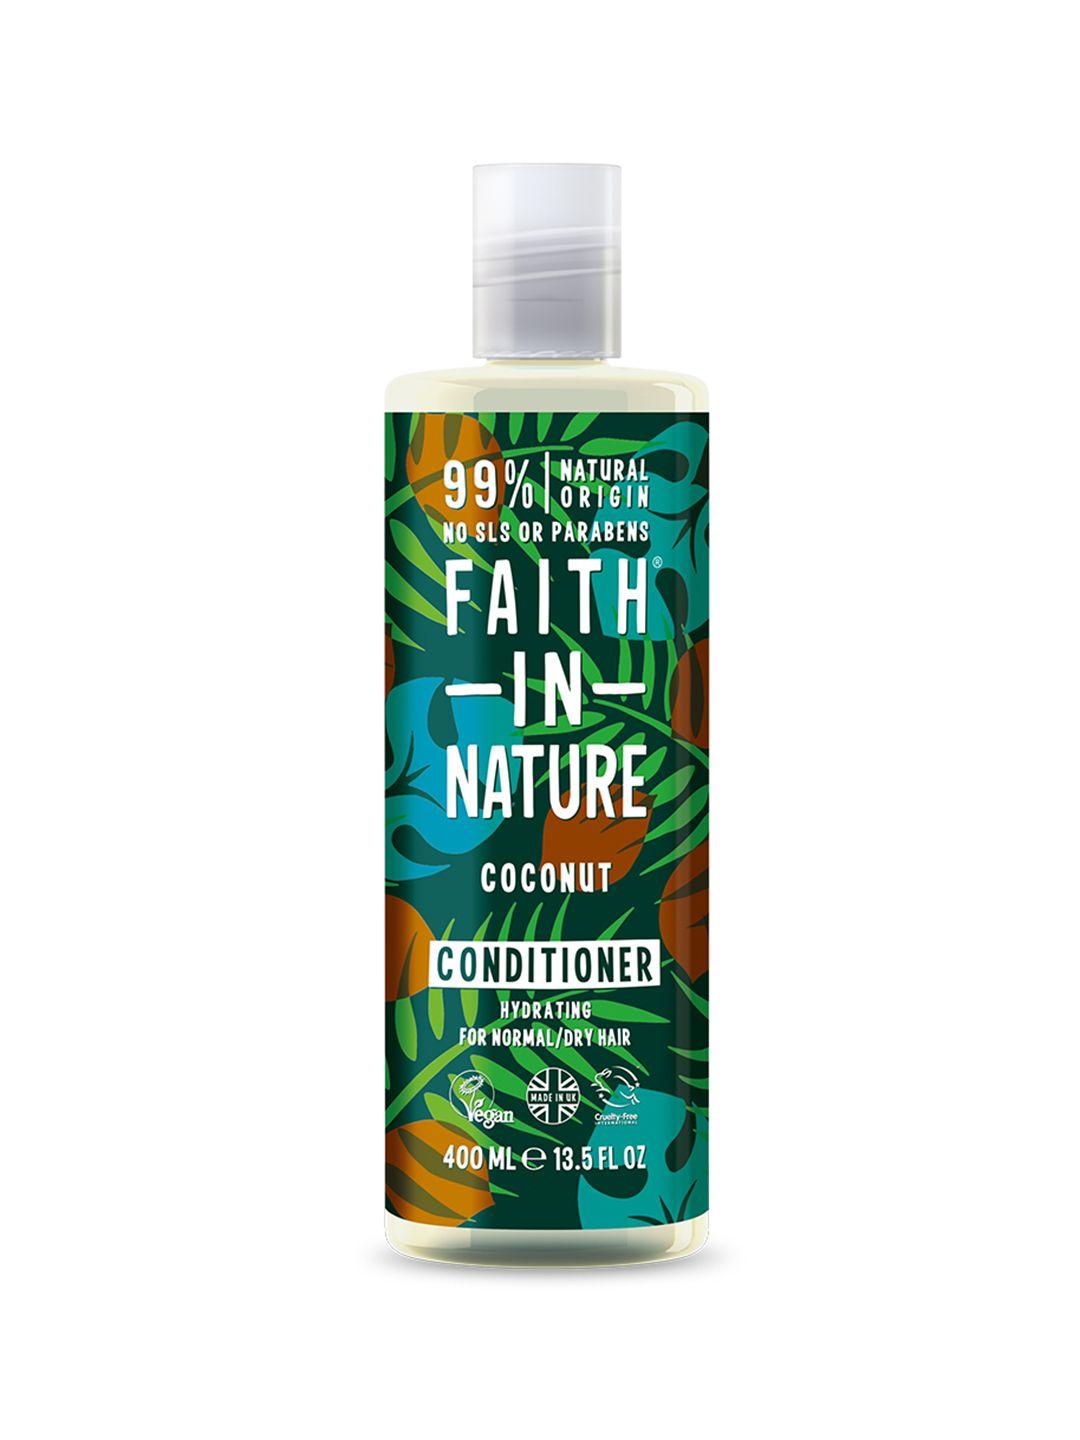 faith in nature coconut conditioner - hydrating for normal / dry hair - 400ml